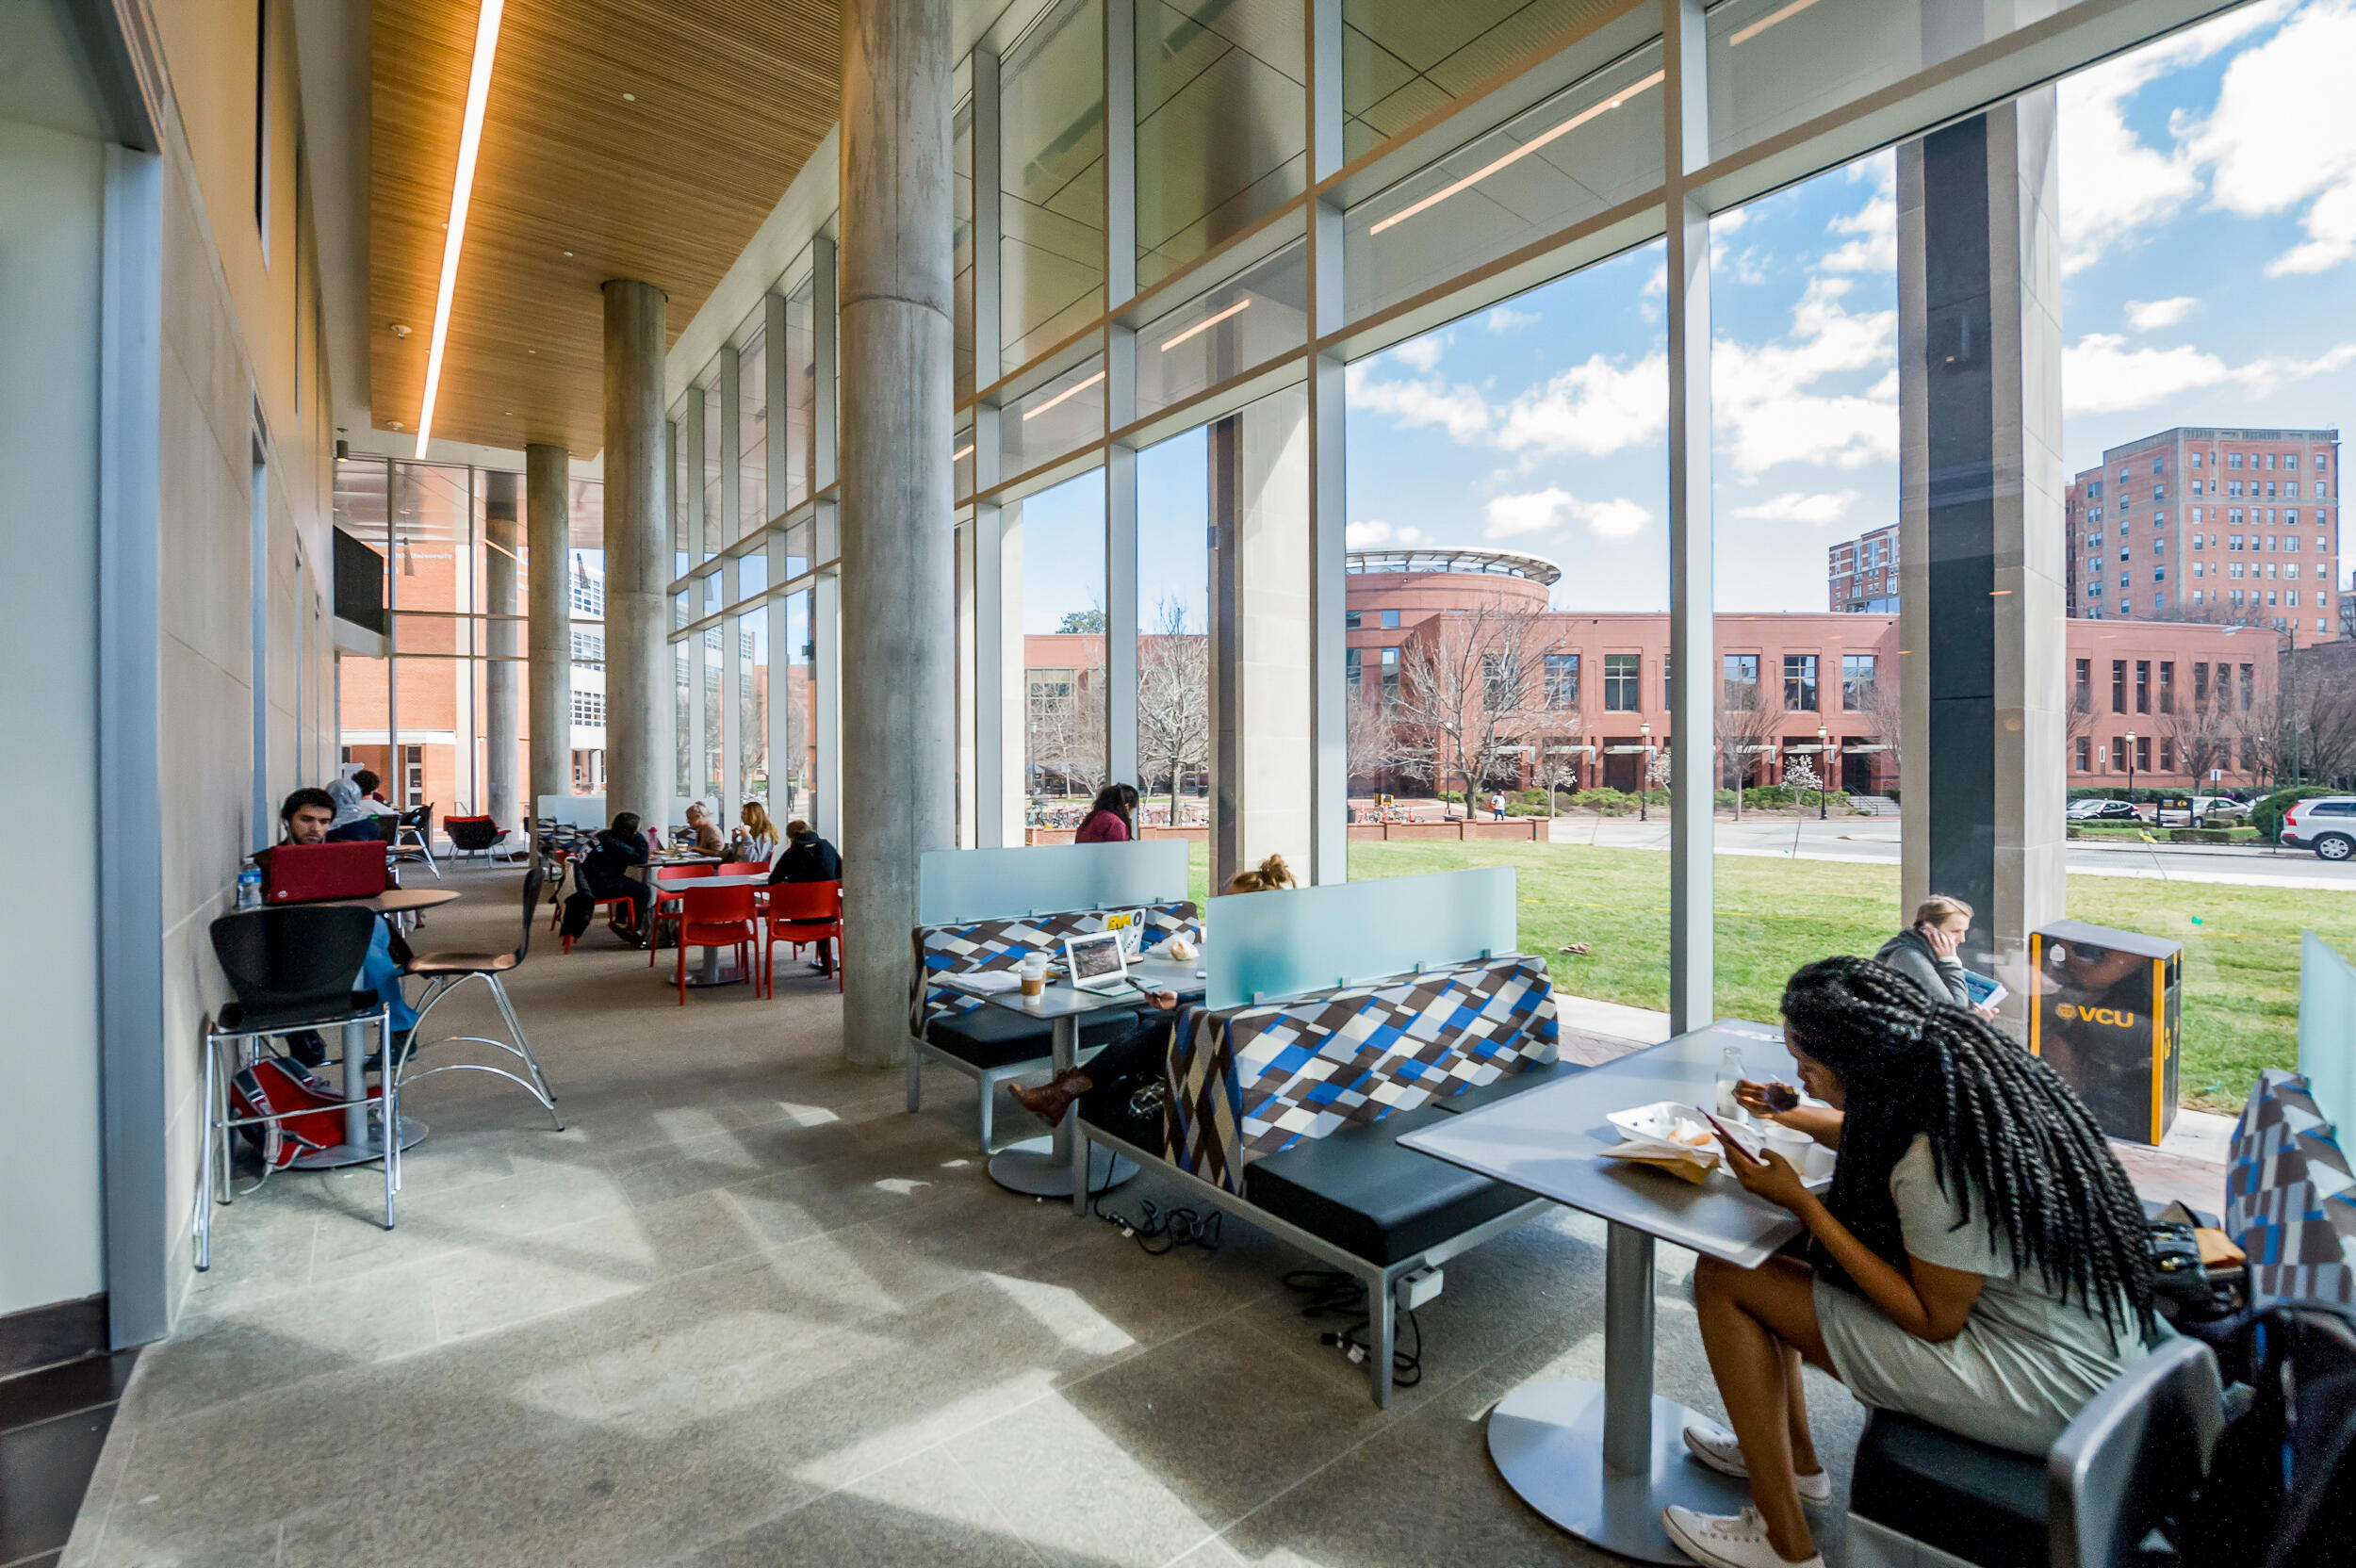 Students study by large windows on a sunny day at VCU Cabell Library across a green quad from Shafer Dining Court.